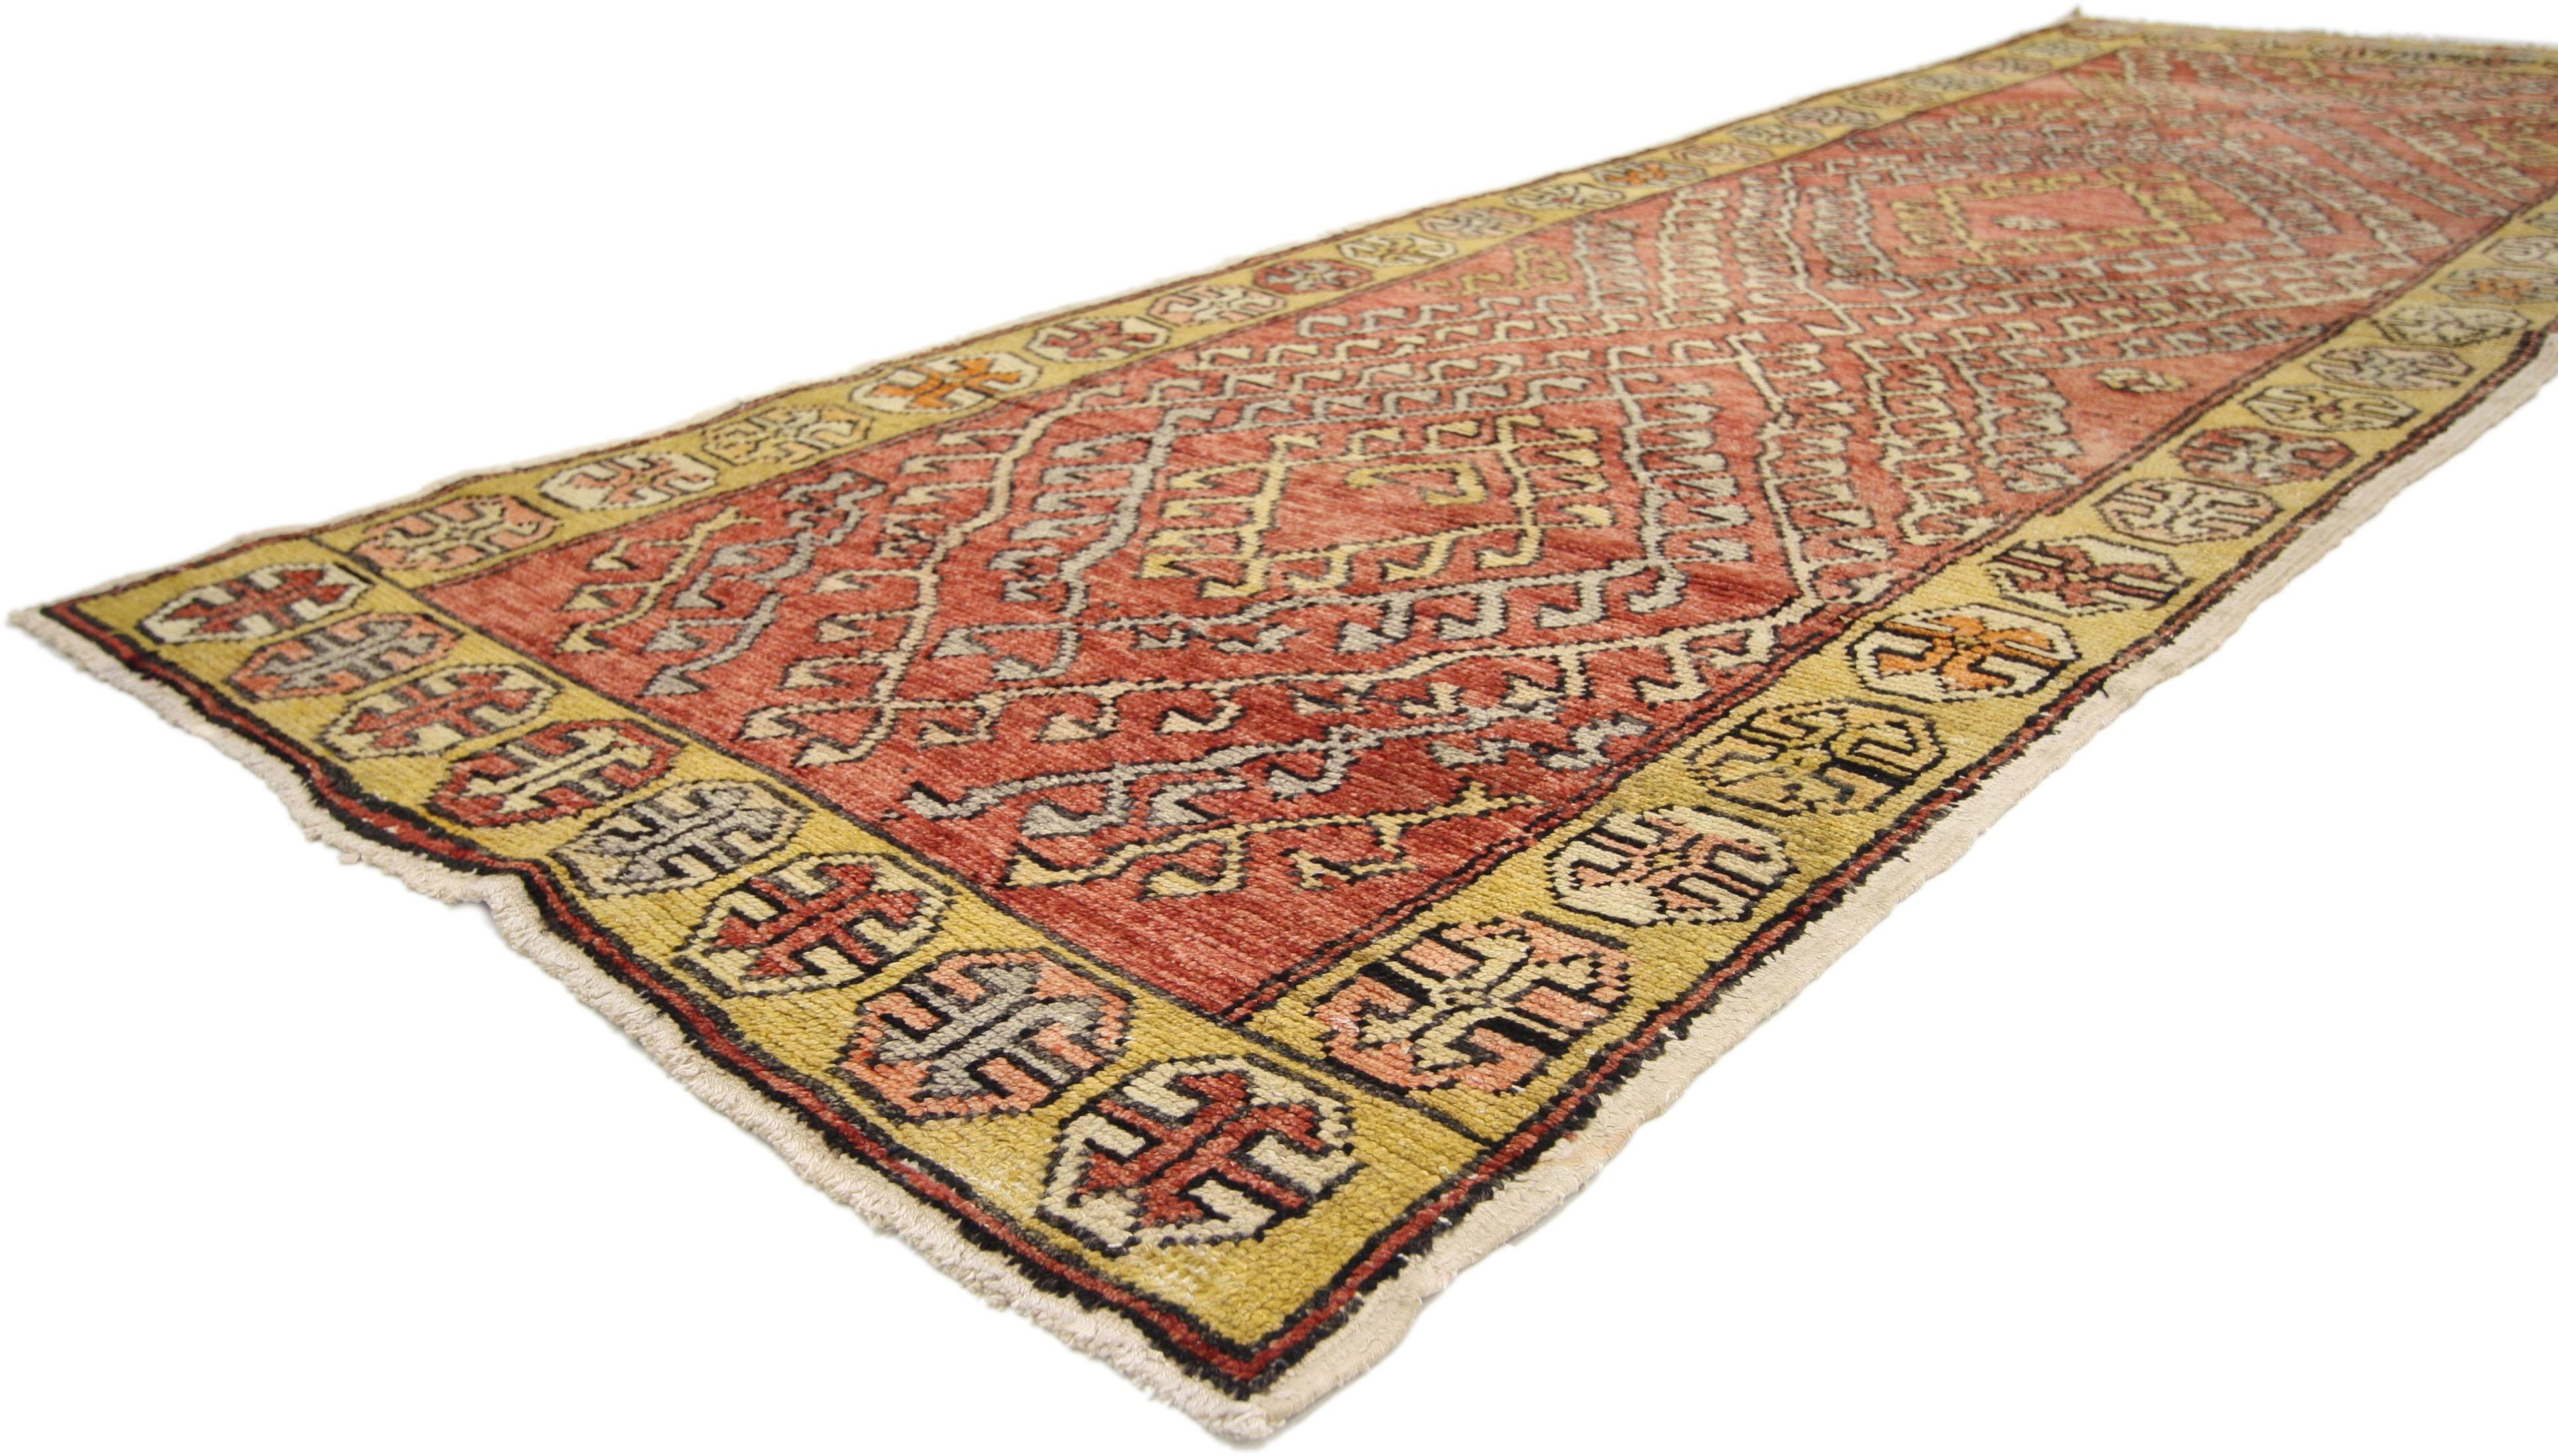 This hand-knotted wool vintage Turkish Oushak runner features a modern tribal style. The rich waves of abrash and eccentric design of this Oushak carpet runner showcase a highly decorative composition with time-softened colors. Rendered in